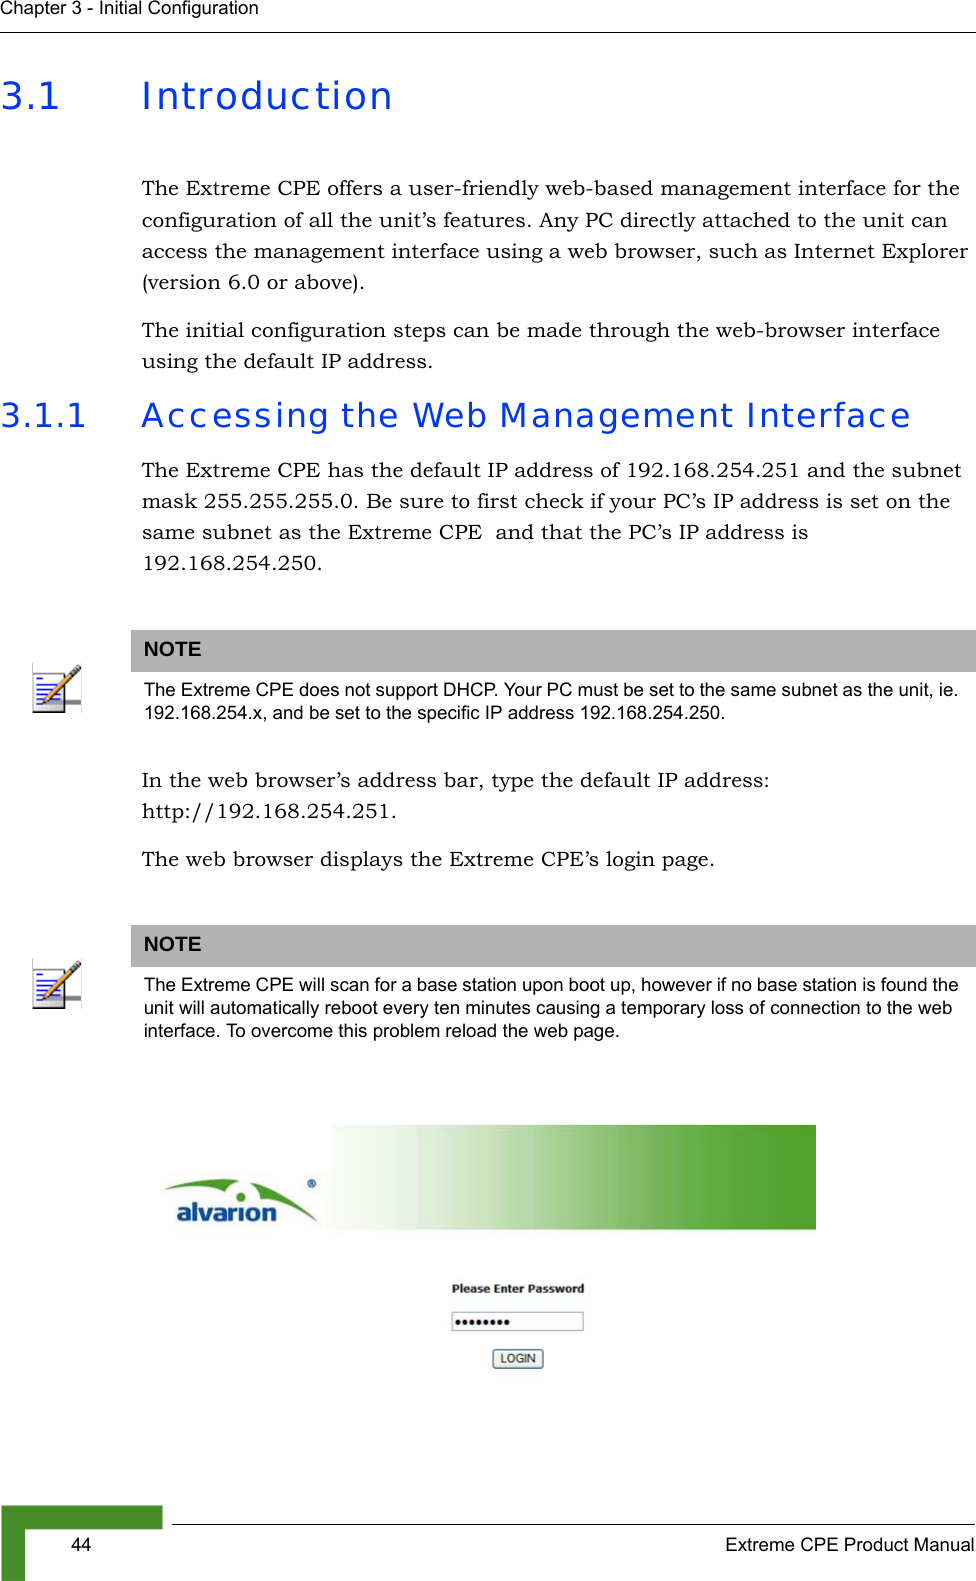 44 Extreme CPE Product ManualChapter 3 - Initial Configuration3.1 IntroductionThe Extreme CPE offers a user-friendly web-based management interface for the configuration of all the unit’s features. Any PC directly attached to the unit can access the management interface using a web browser, such as Internet Explorer (version 6.0 or above).The initial configuration steps can be made through the web-browser interface using the default IP address.3.1.1 Accessing the Web Management InterfaceThe Extreme CPE has the default IP address of 192.168.254.251 and the subnet mask 255.255.255.0. Be sure to first check if your PC’s IP address is set on the same subnet as the Extreme CPE  and that the PC’s IP address is 192.168.254.250.In the web browser’s address bar, type the default IP address: http://192.168.254.251.The web browser displays the Extreme CPE’s login page. NOTEThe Extreme CPE does not support DHCP. Your PC must be set to the same subnet as the unit, ie. 192.168.254.x, and be set to the specific IP address 192.168.254.250.NOTEThe Extreme CPE will scan for a base station upon boot up, however if no base station is found the unit will automatically reboot every ten minutes causing a temporary loss of connection to the web interface. To overcome this problem reload the web page.